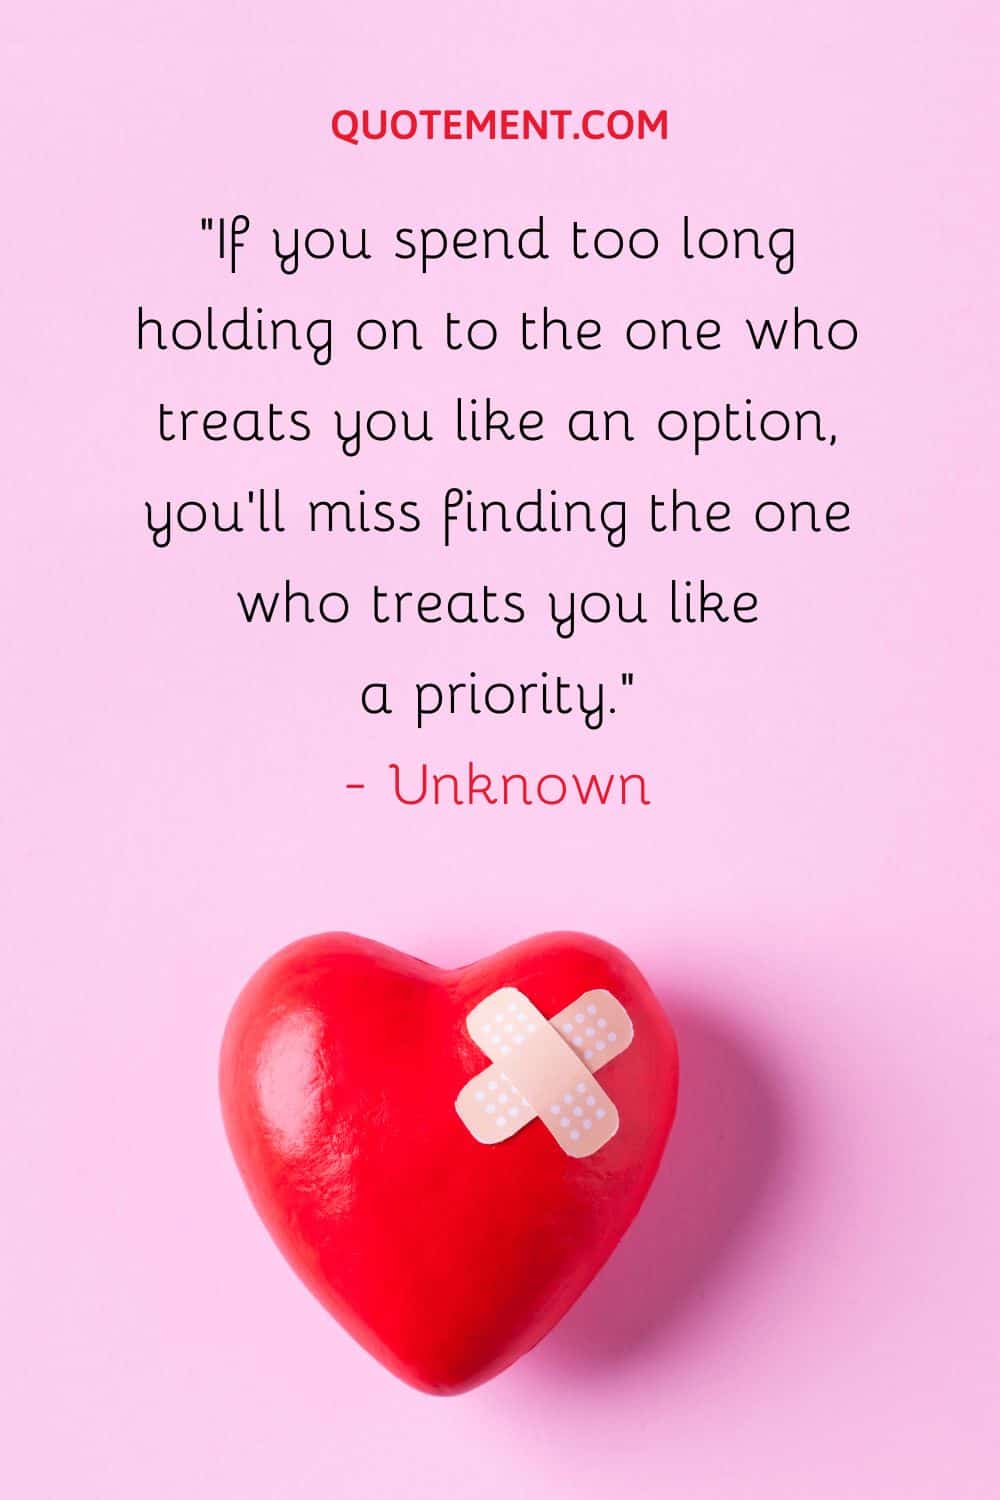 If you spend too long holding on to the one who treats you like an option, you’ll miss finding the one who treats you like a priority.